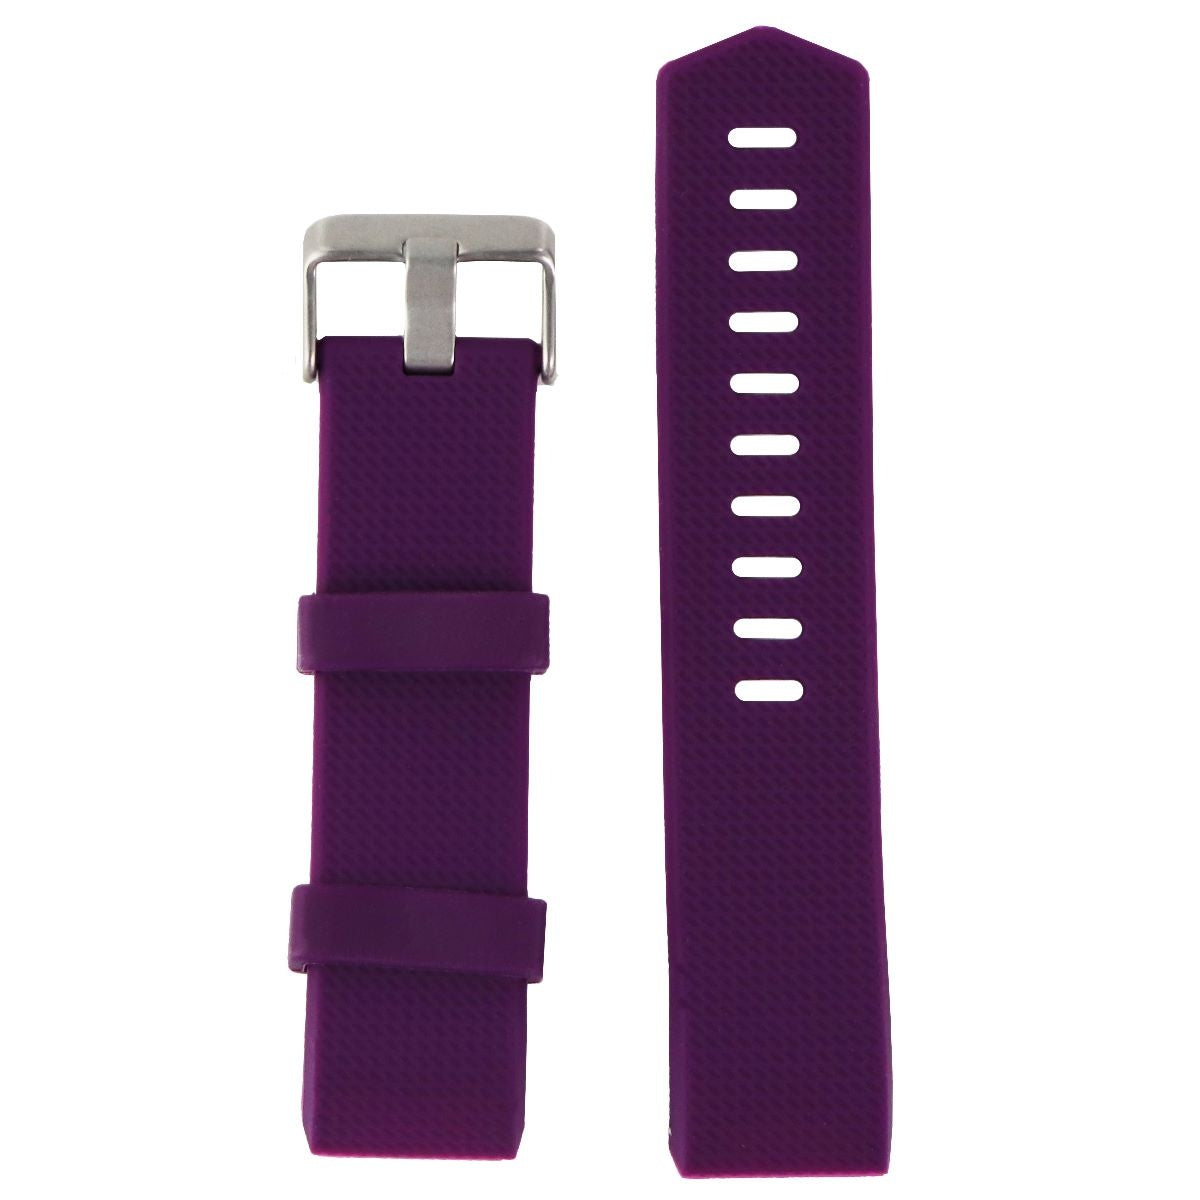 Replacement Band for Fitbit Charge 2 Activity Tracker - Purple/Silver Smart Watch Accessories - Watch Bands Unbranded    - Simple Cell Bulk Wholesale Pricing - USA Seller